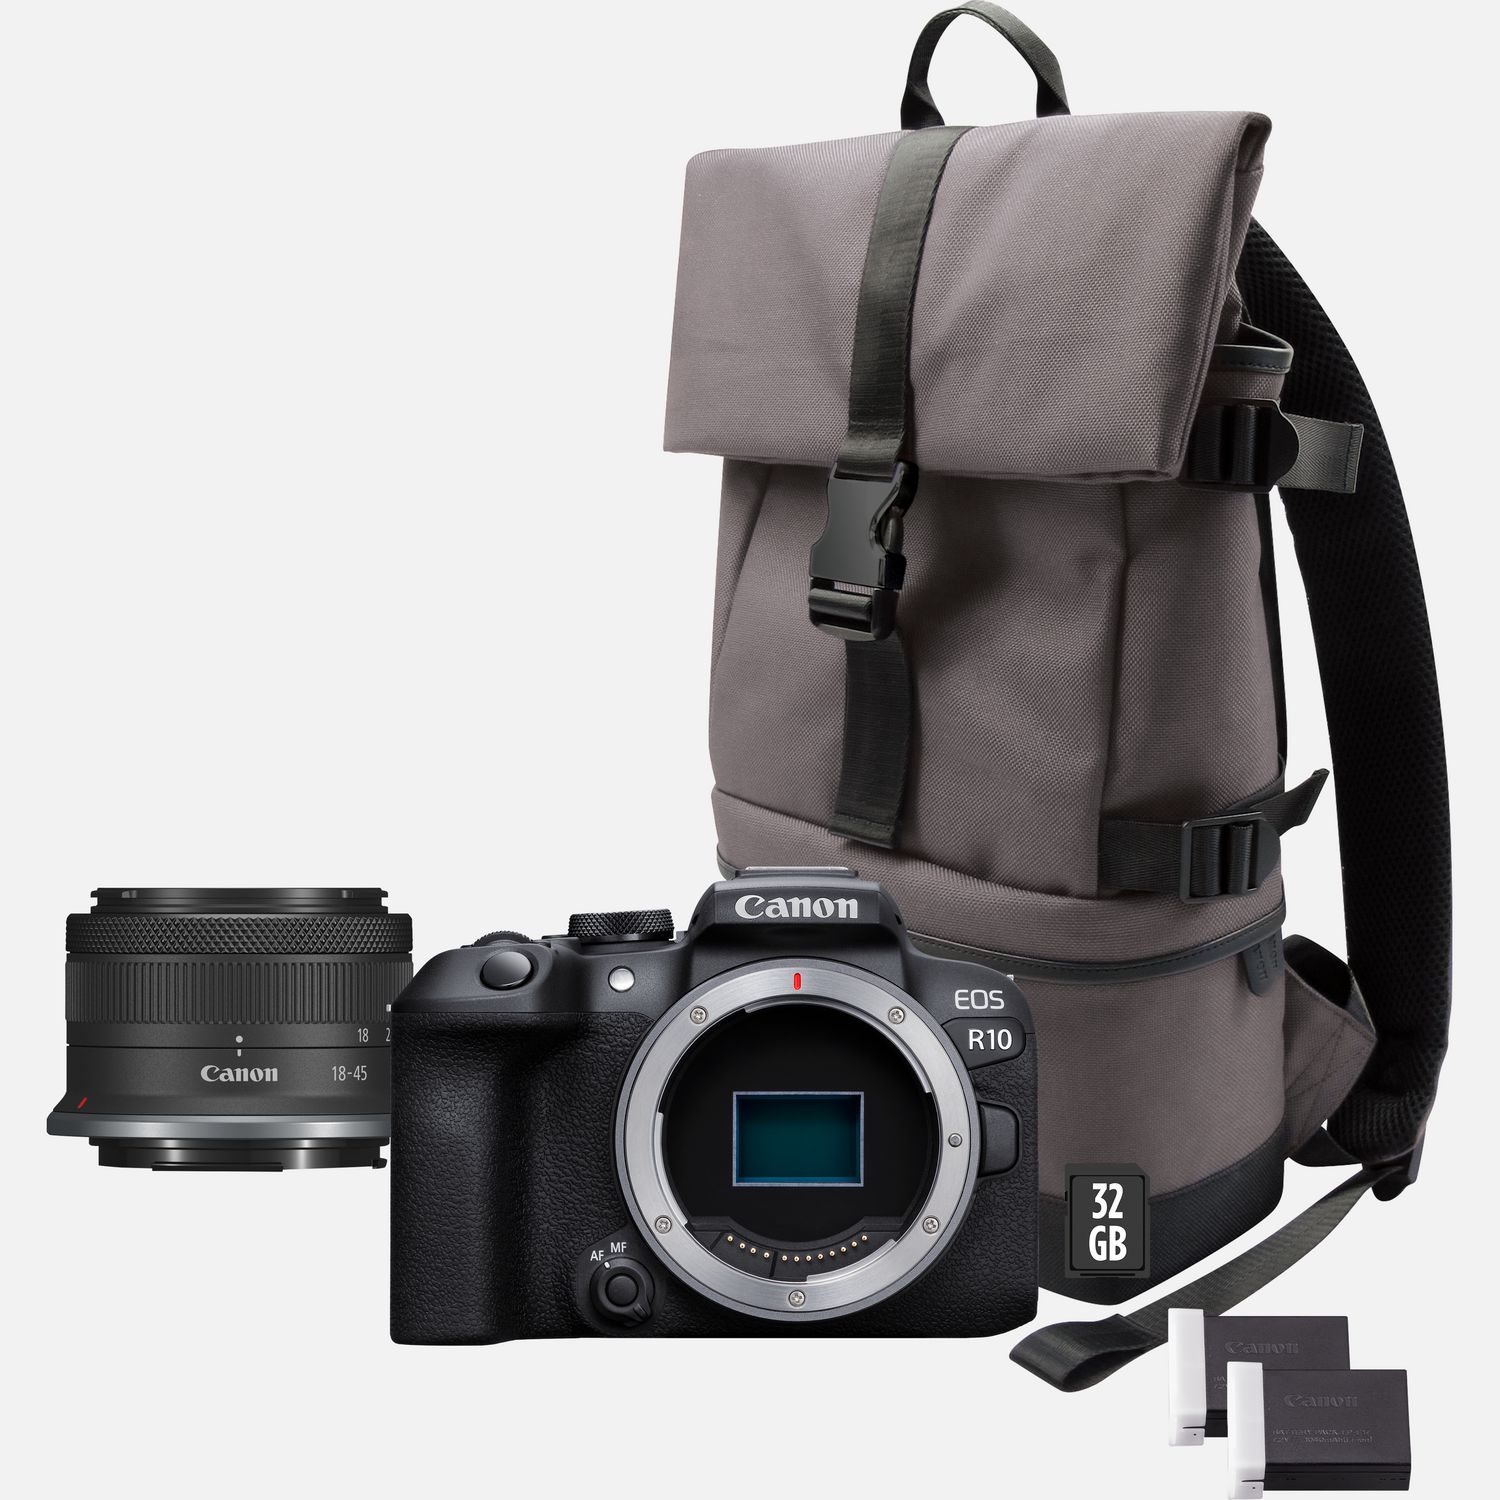 Plunderen honderd Conform Buy Canon EOS R10-systeemcamera + RF-S 18-45mm F4.5-6.3 IS STM-lens +  backpack + SD-kaart + reserveaccu in Wifi-camera's — Canon Belgie Store